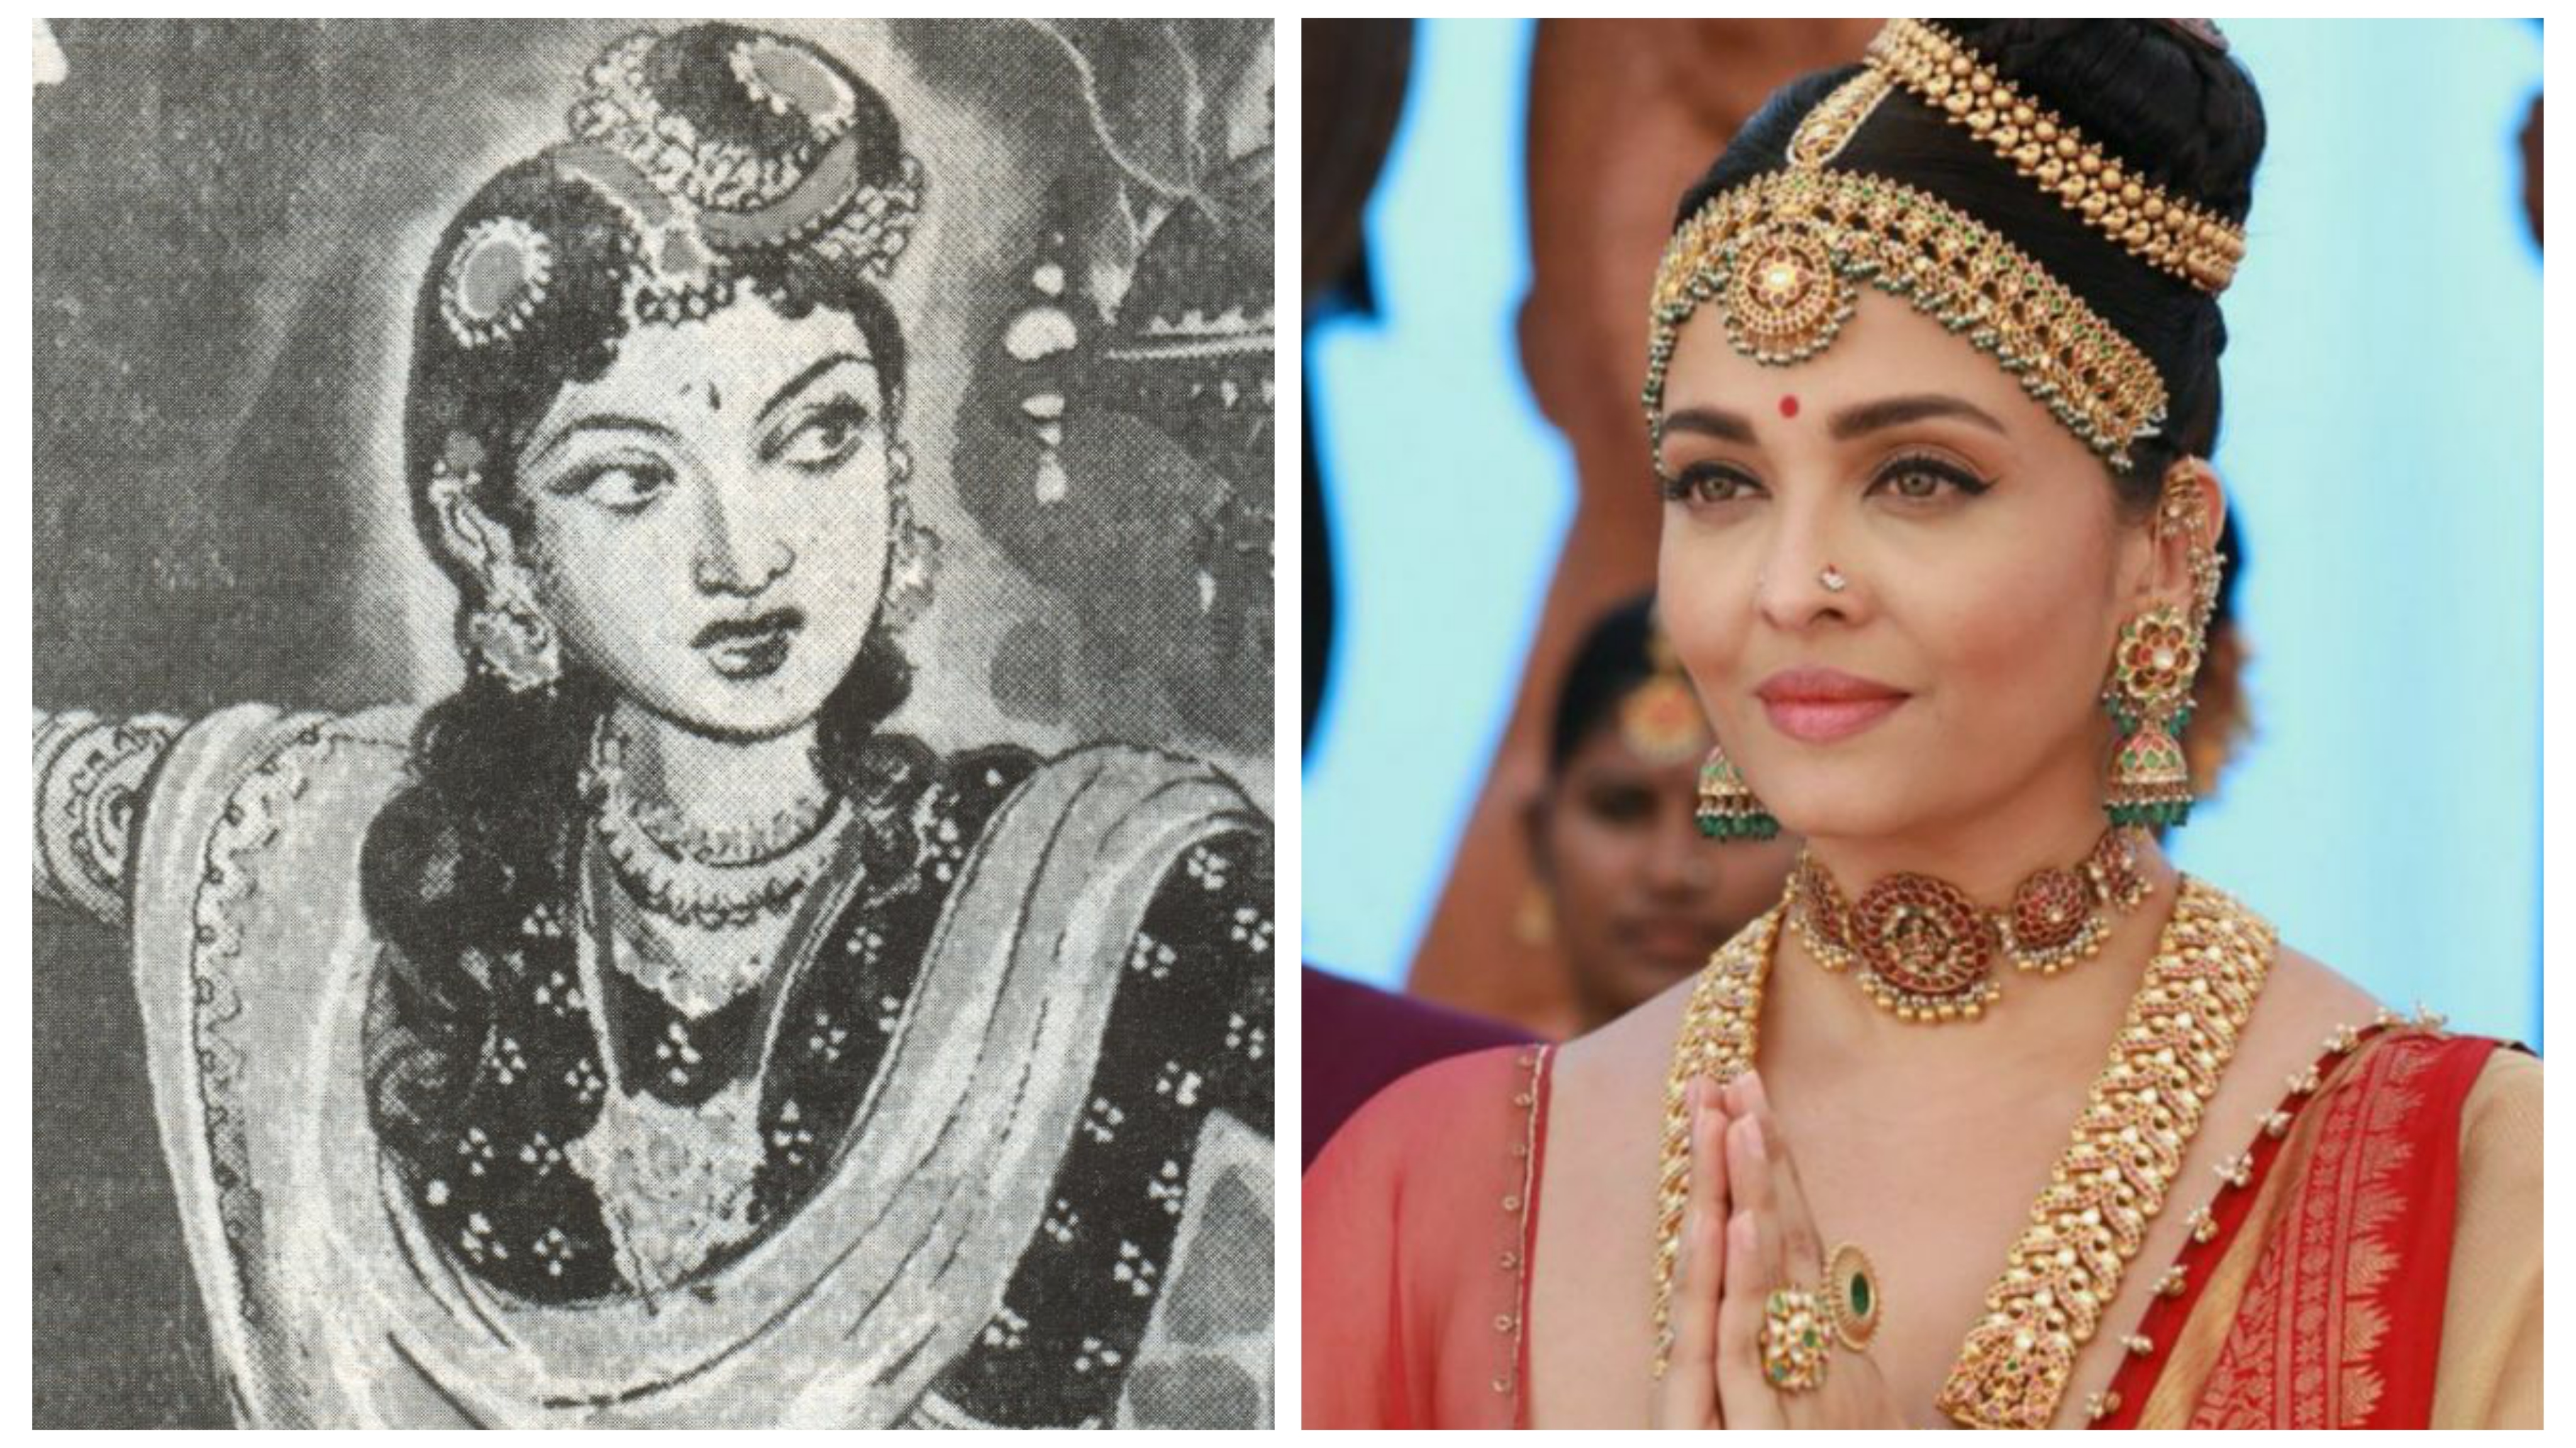 The hairstyle of Aishwarya Rai's Nandini in the film mirrors the illustrations.